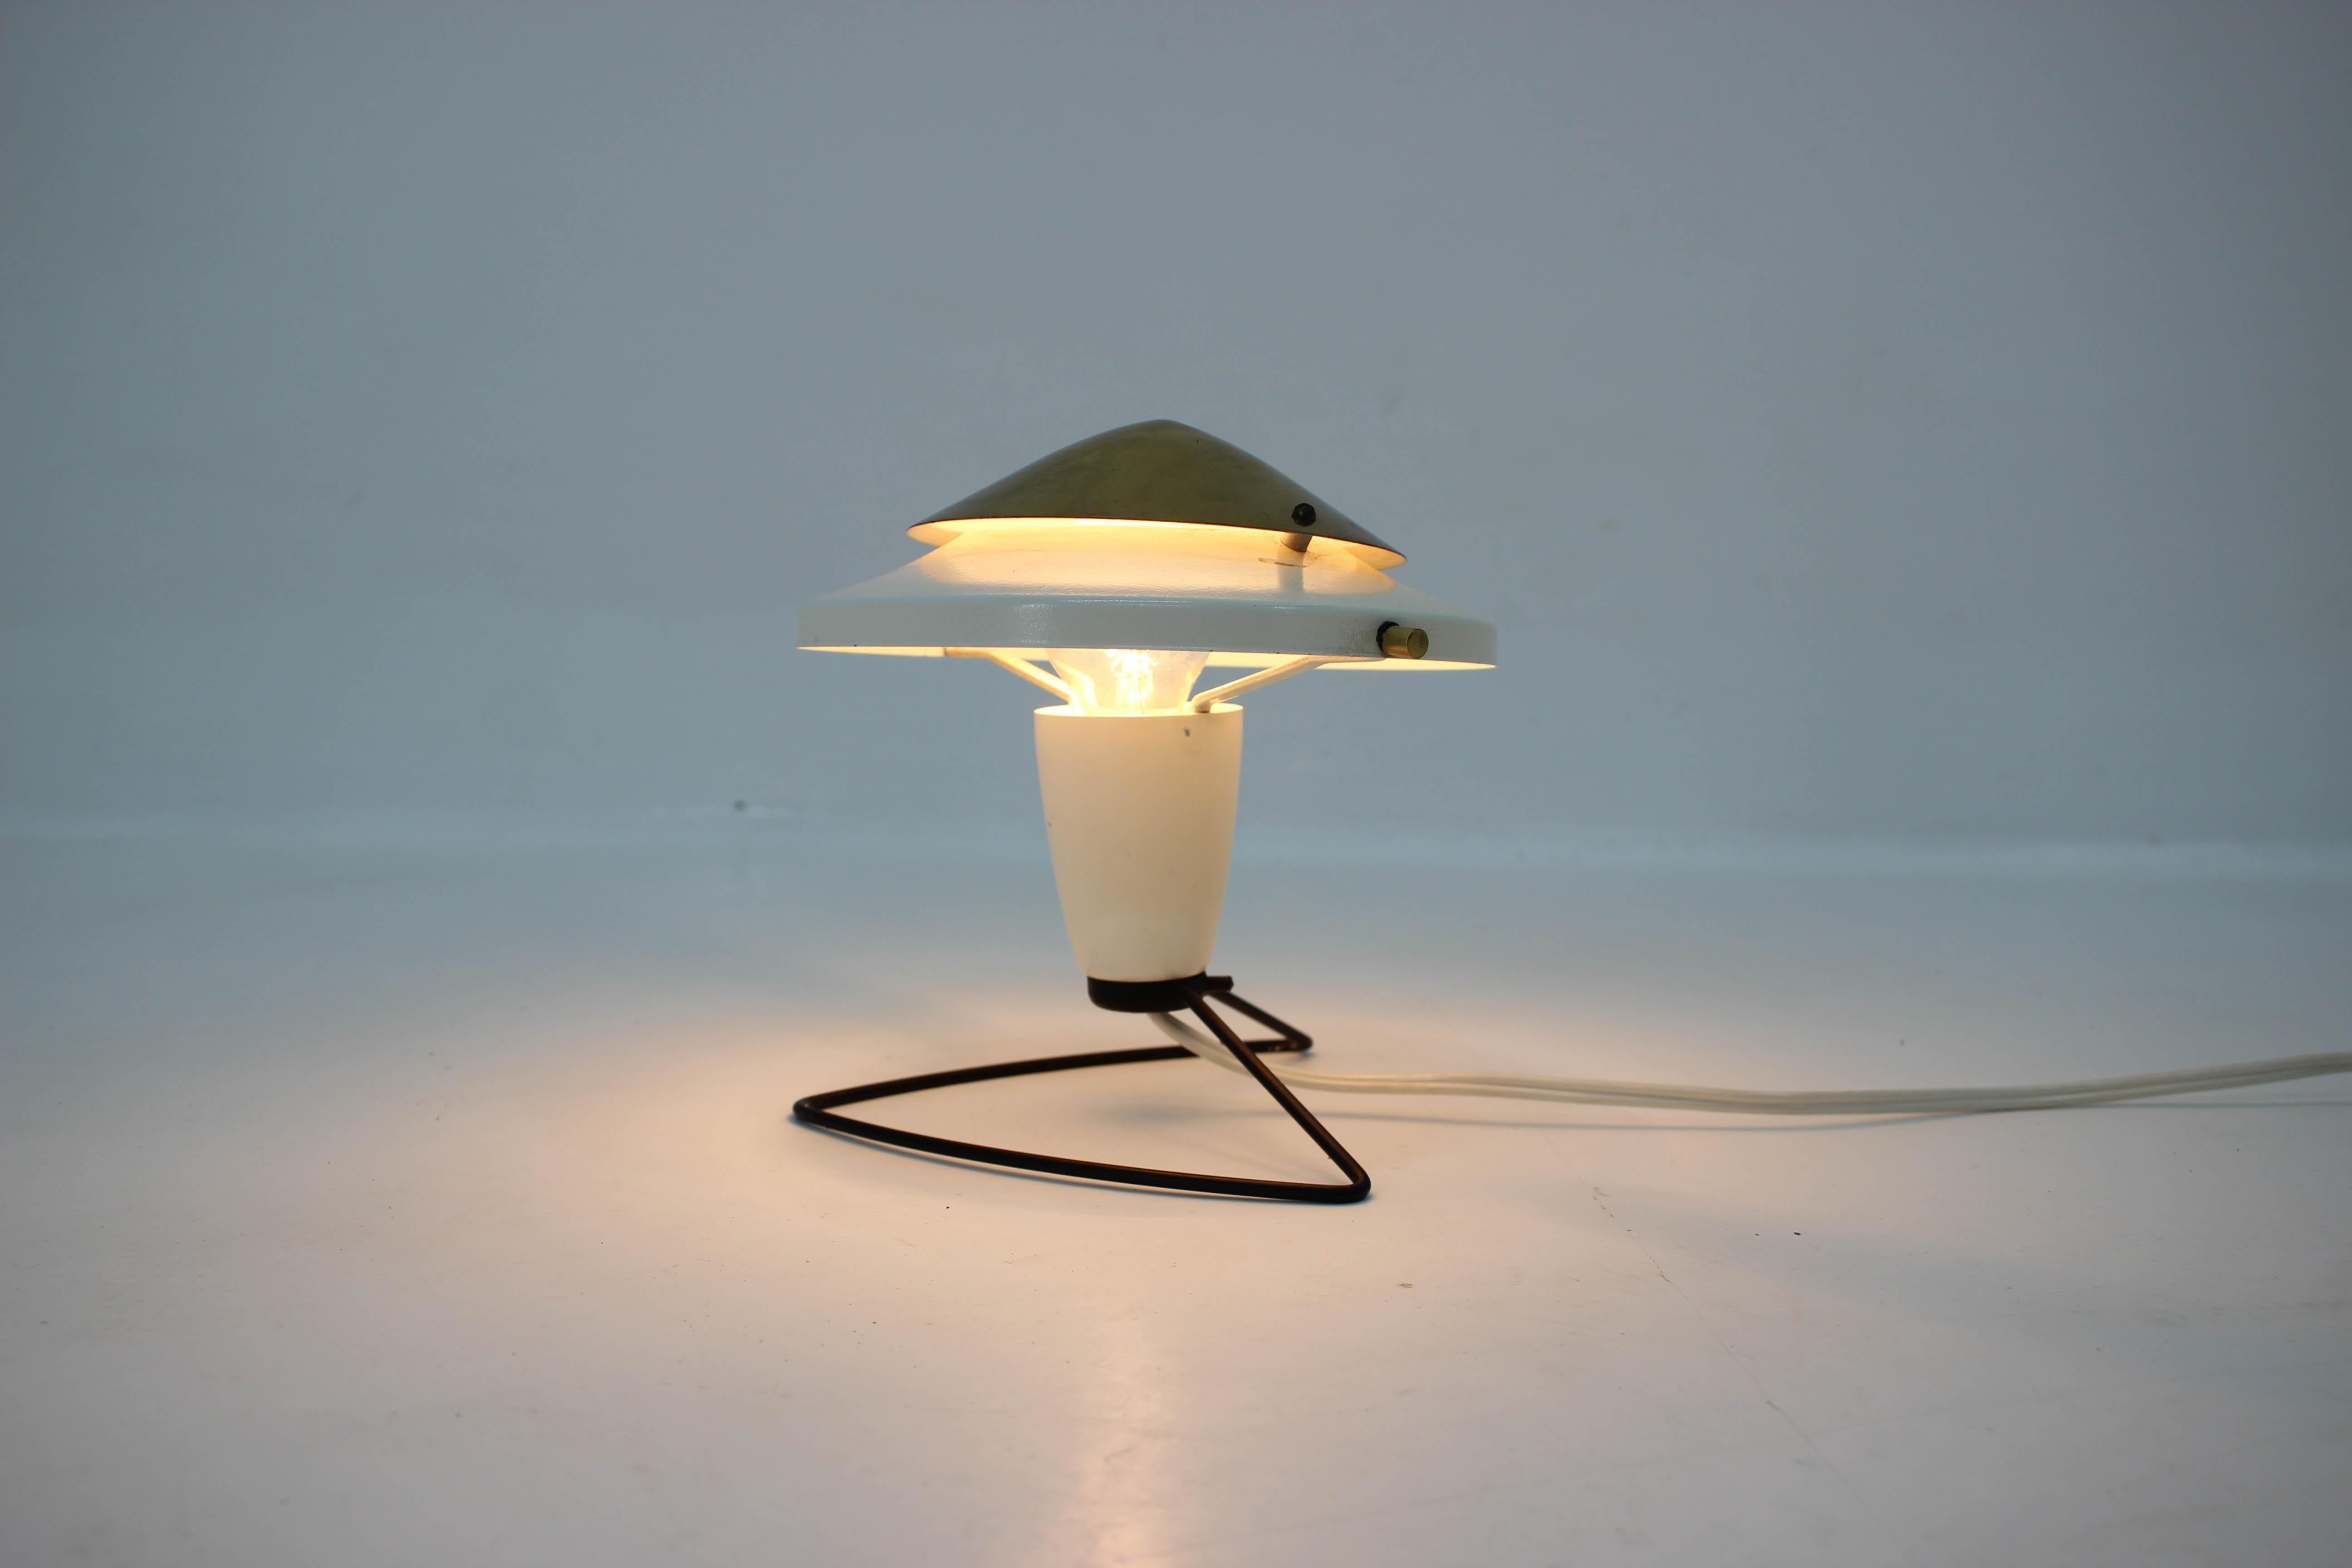 Table or wall lamp
Fully functional
E27 or E26 bulb 40W.